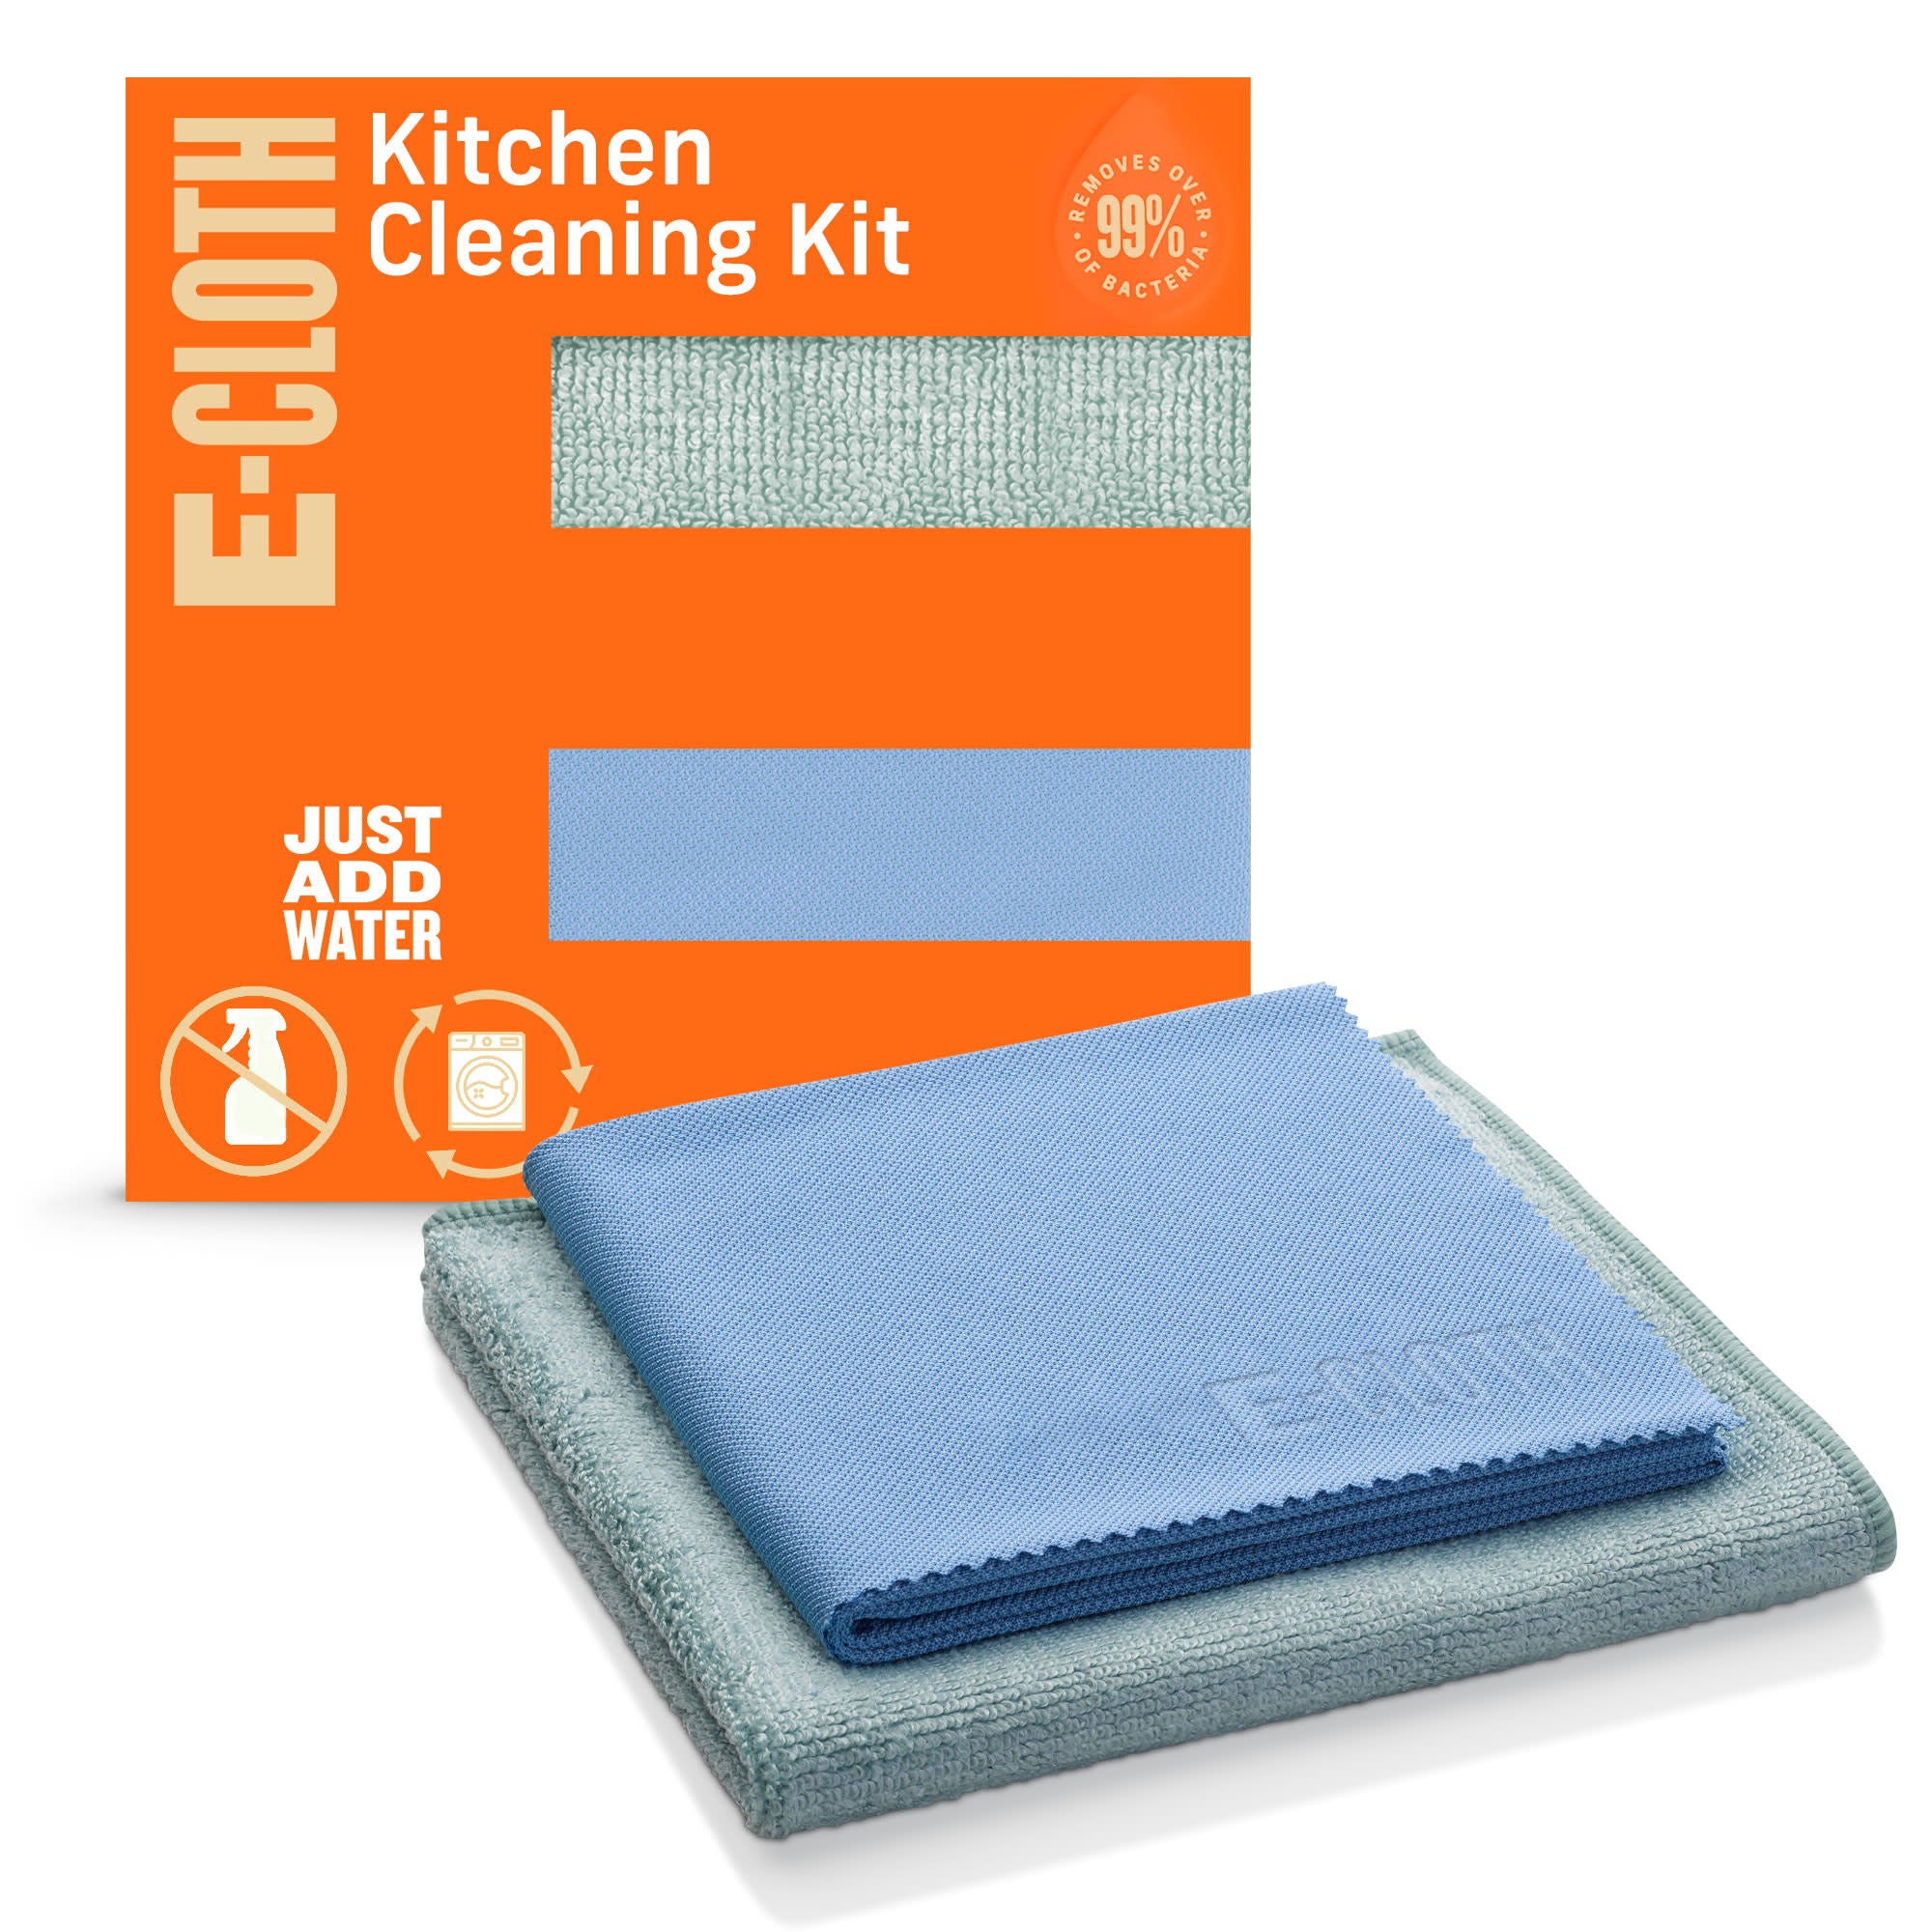 Eco-Friendly Kitchen Cleaning Kit - 2 cloths